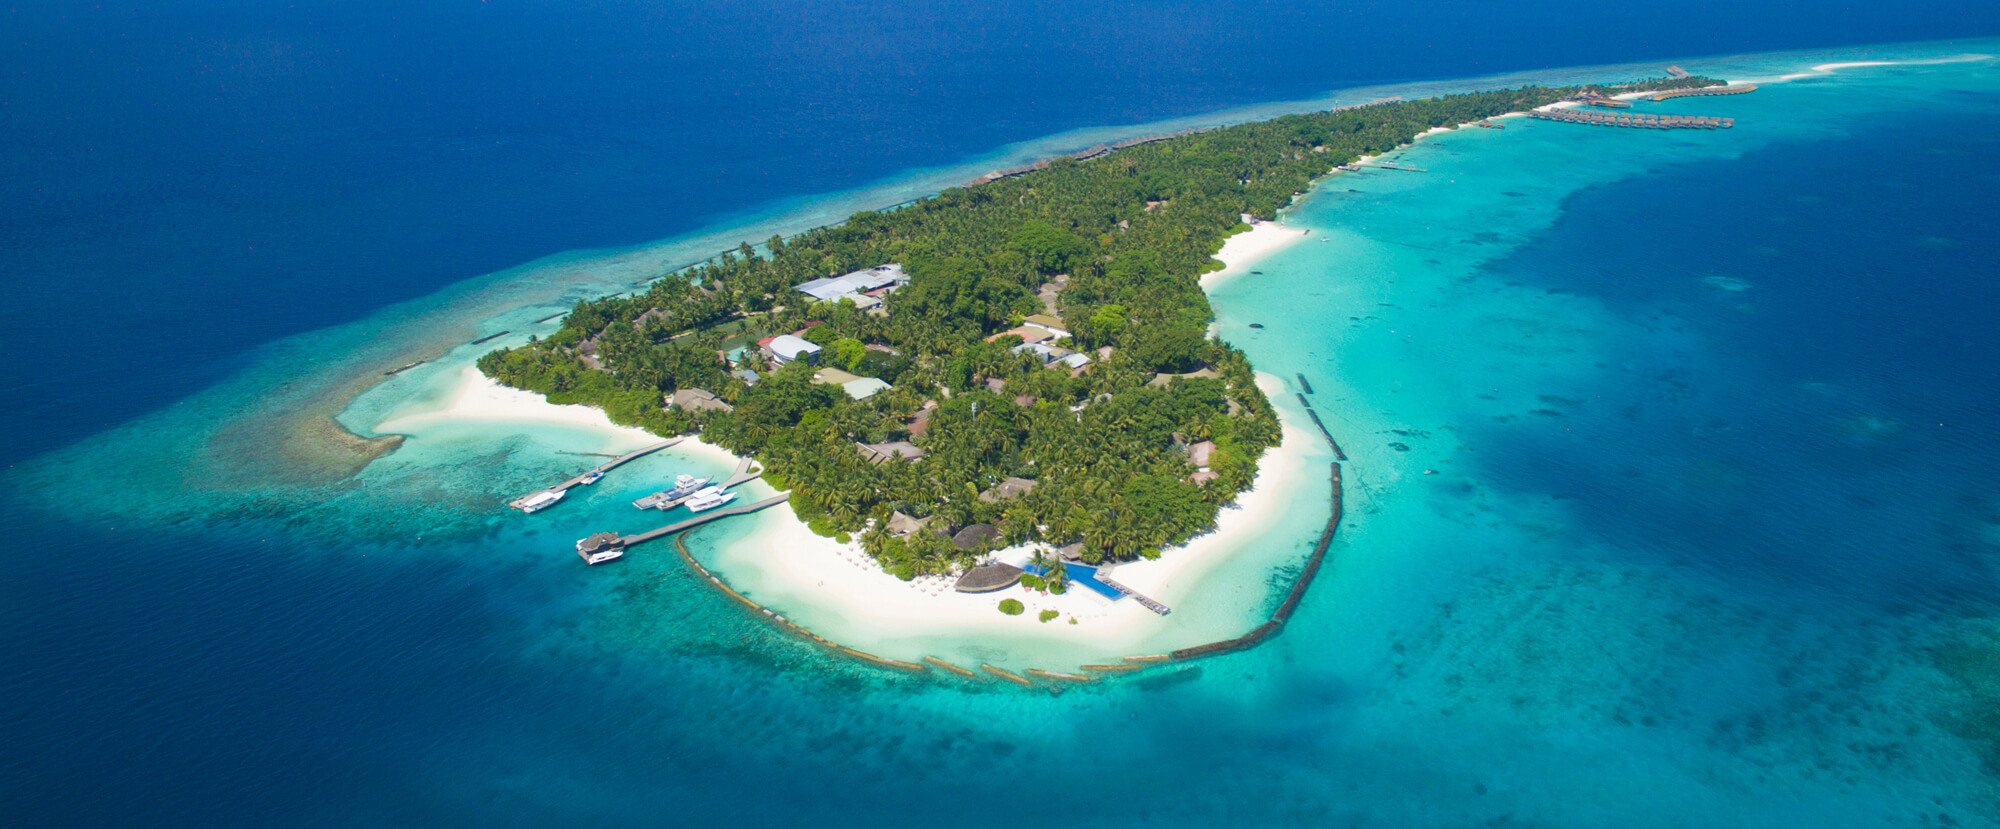 Best scuba diving resorts in the Maldives